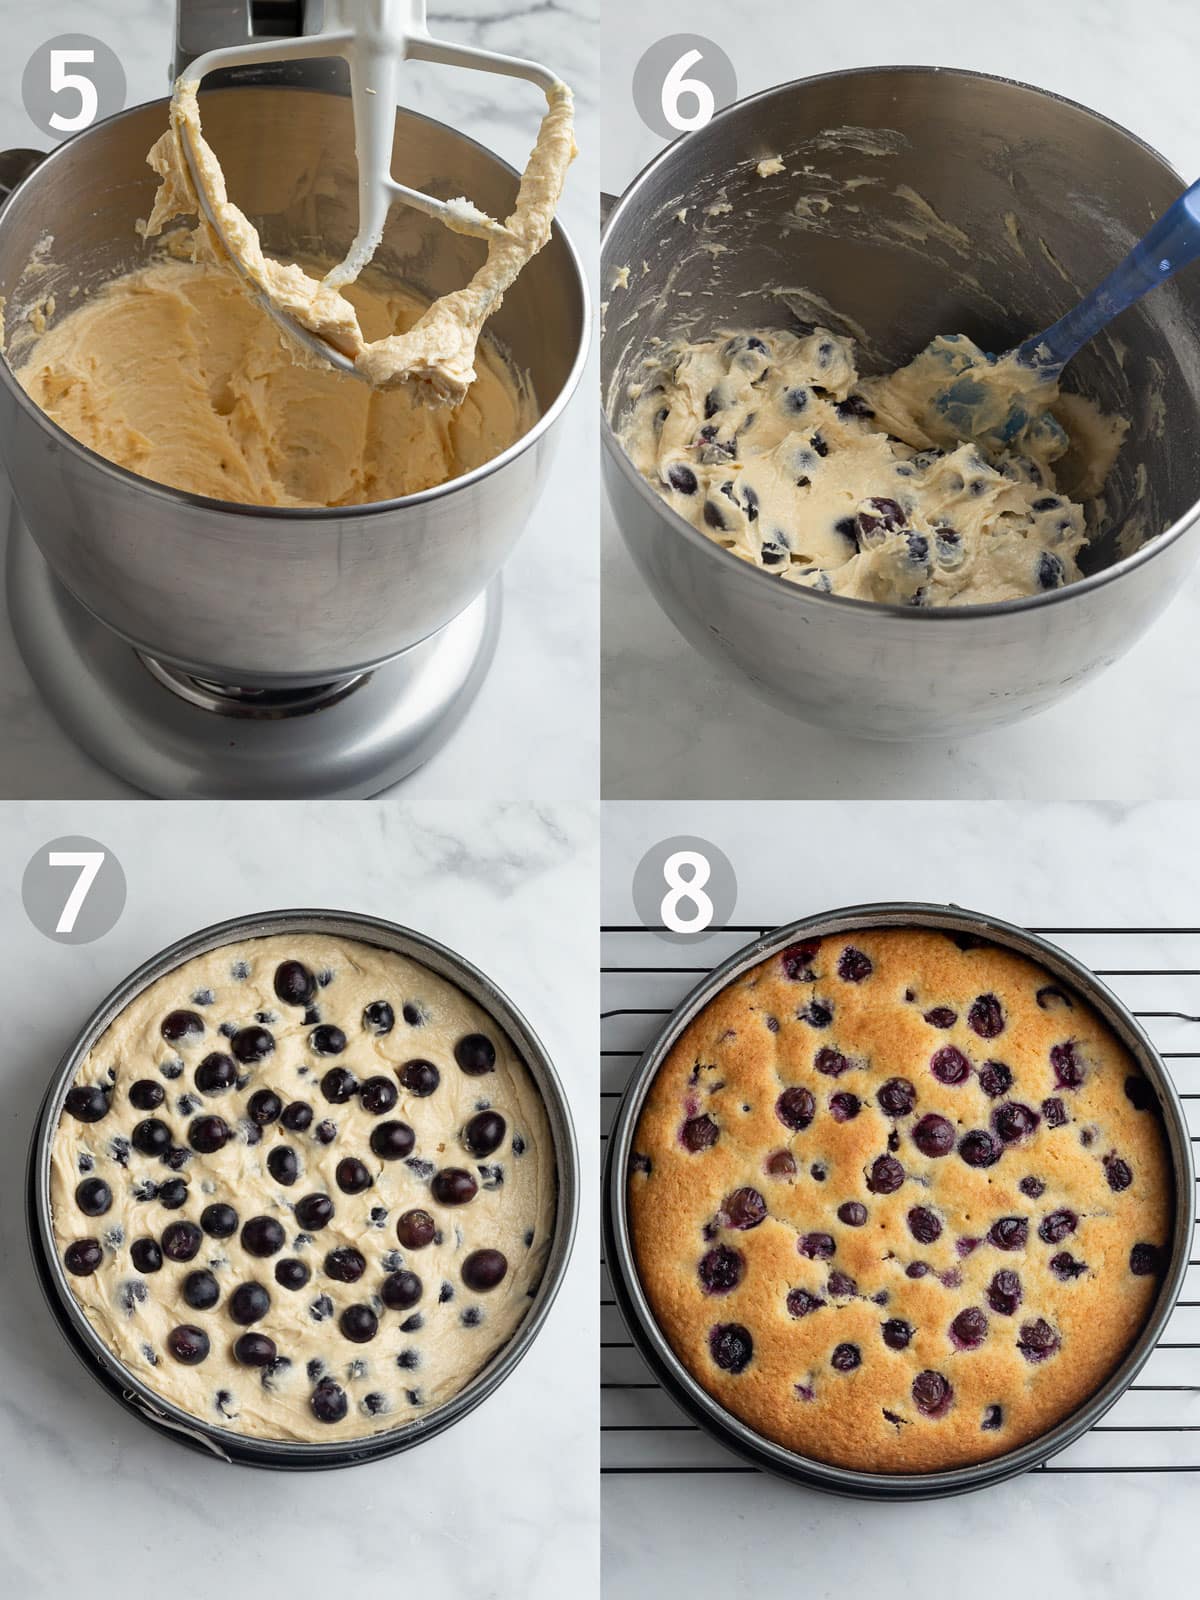 Recipe Steps, 5-8, including combining the wet and dry ingredients and baking the cake.